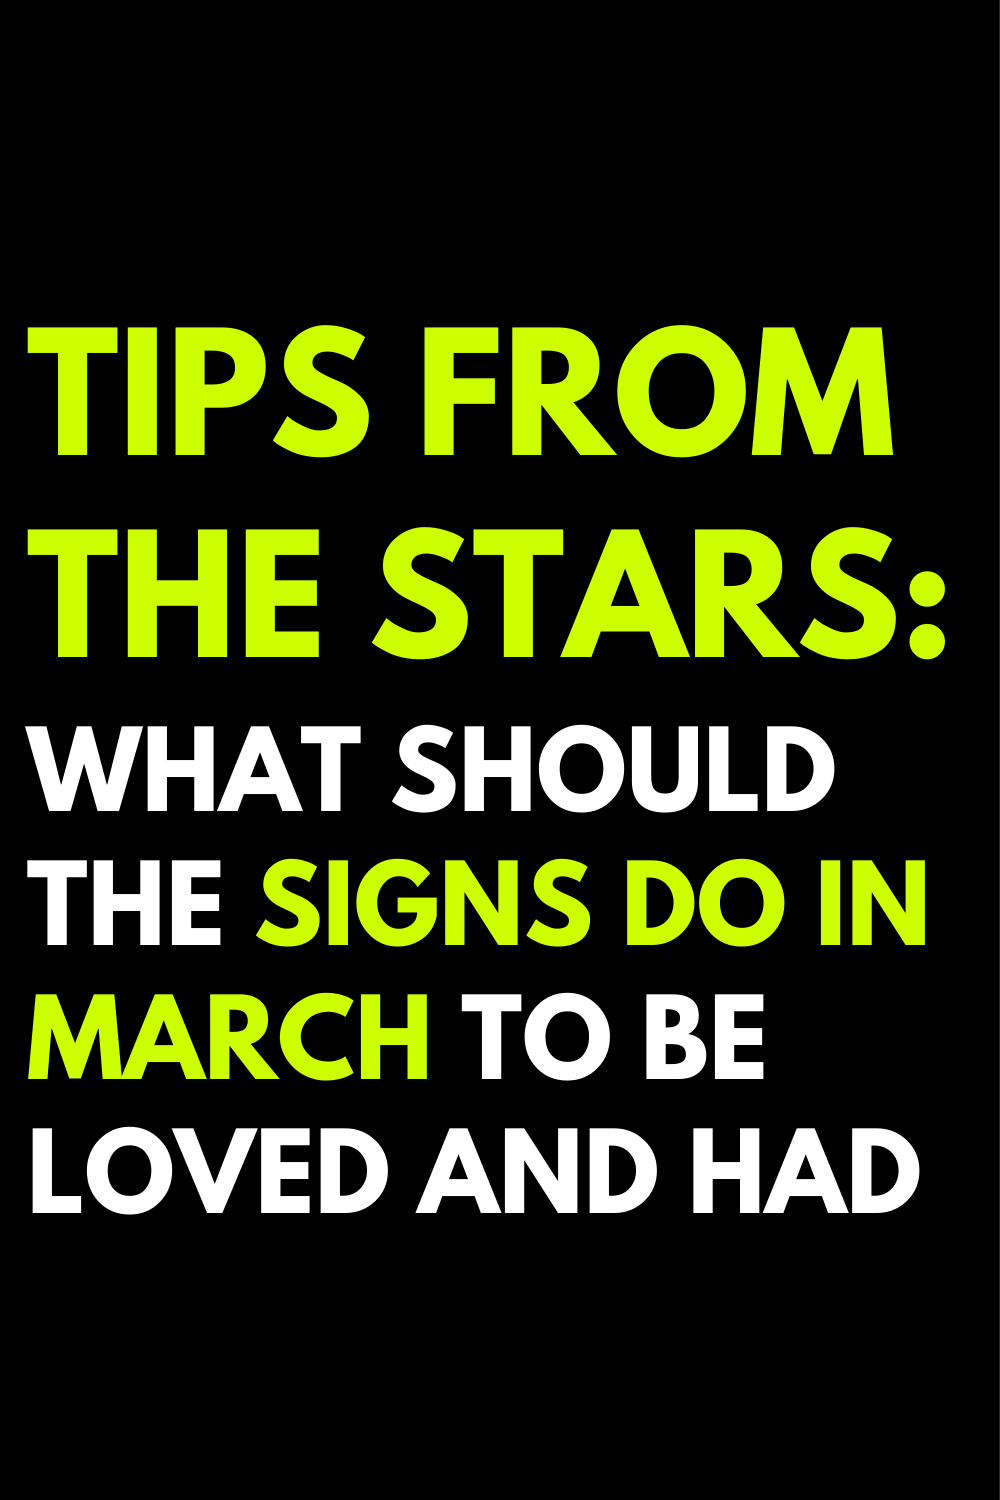 Tips from the stars: What should the signs do in march to be loved and had